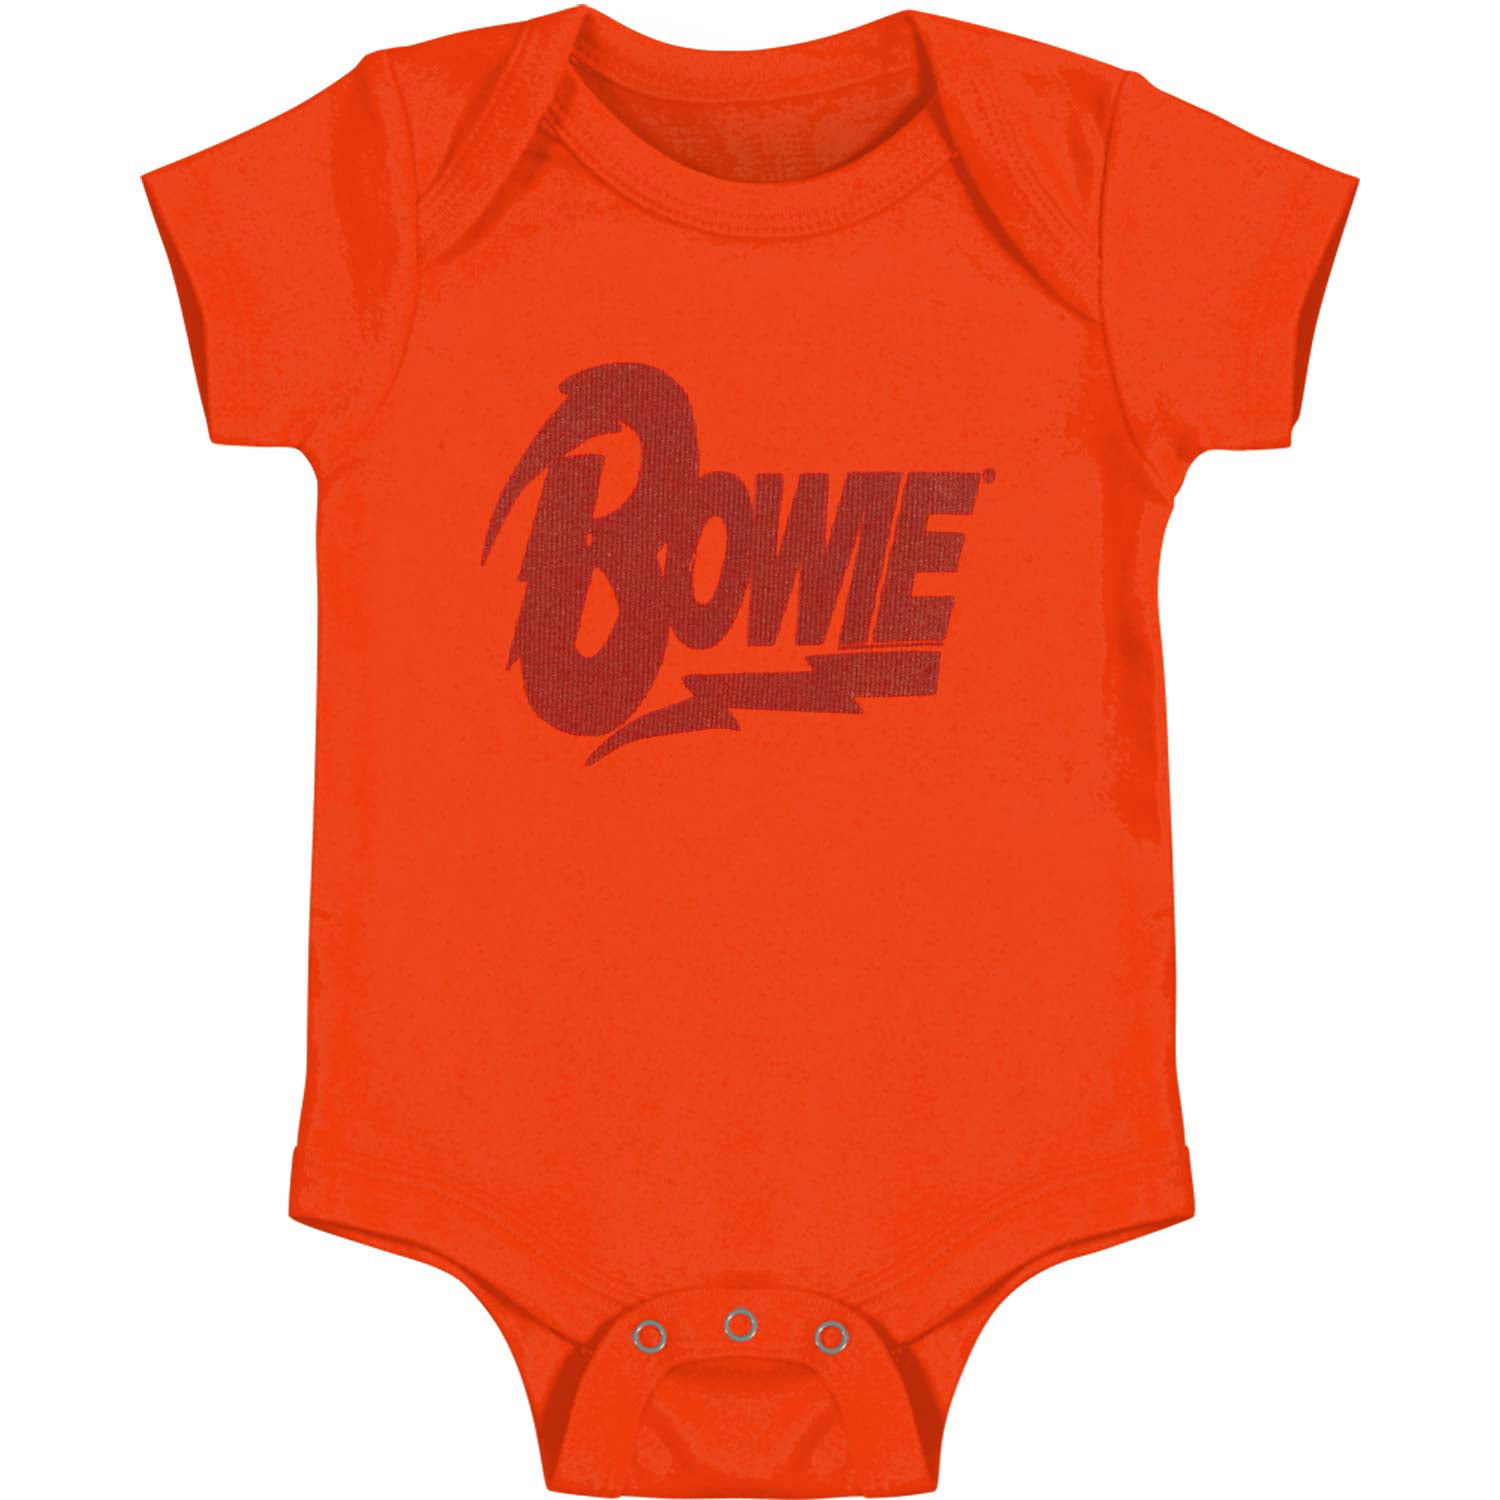 DAVID BOWIE Baby Infant Toddler ONE PIECE BODYSUIT CLOTHING 3 6 9 Months New 